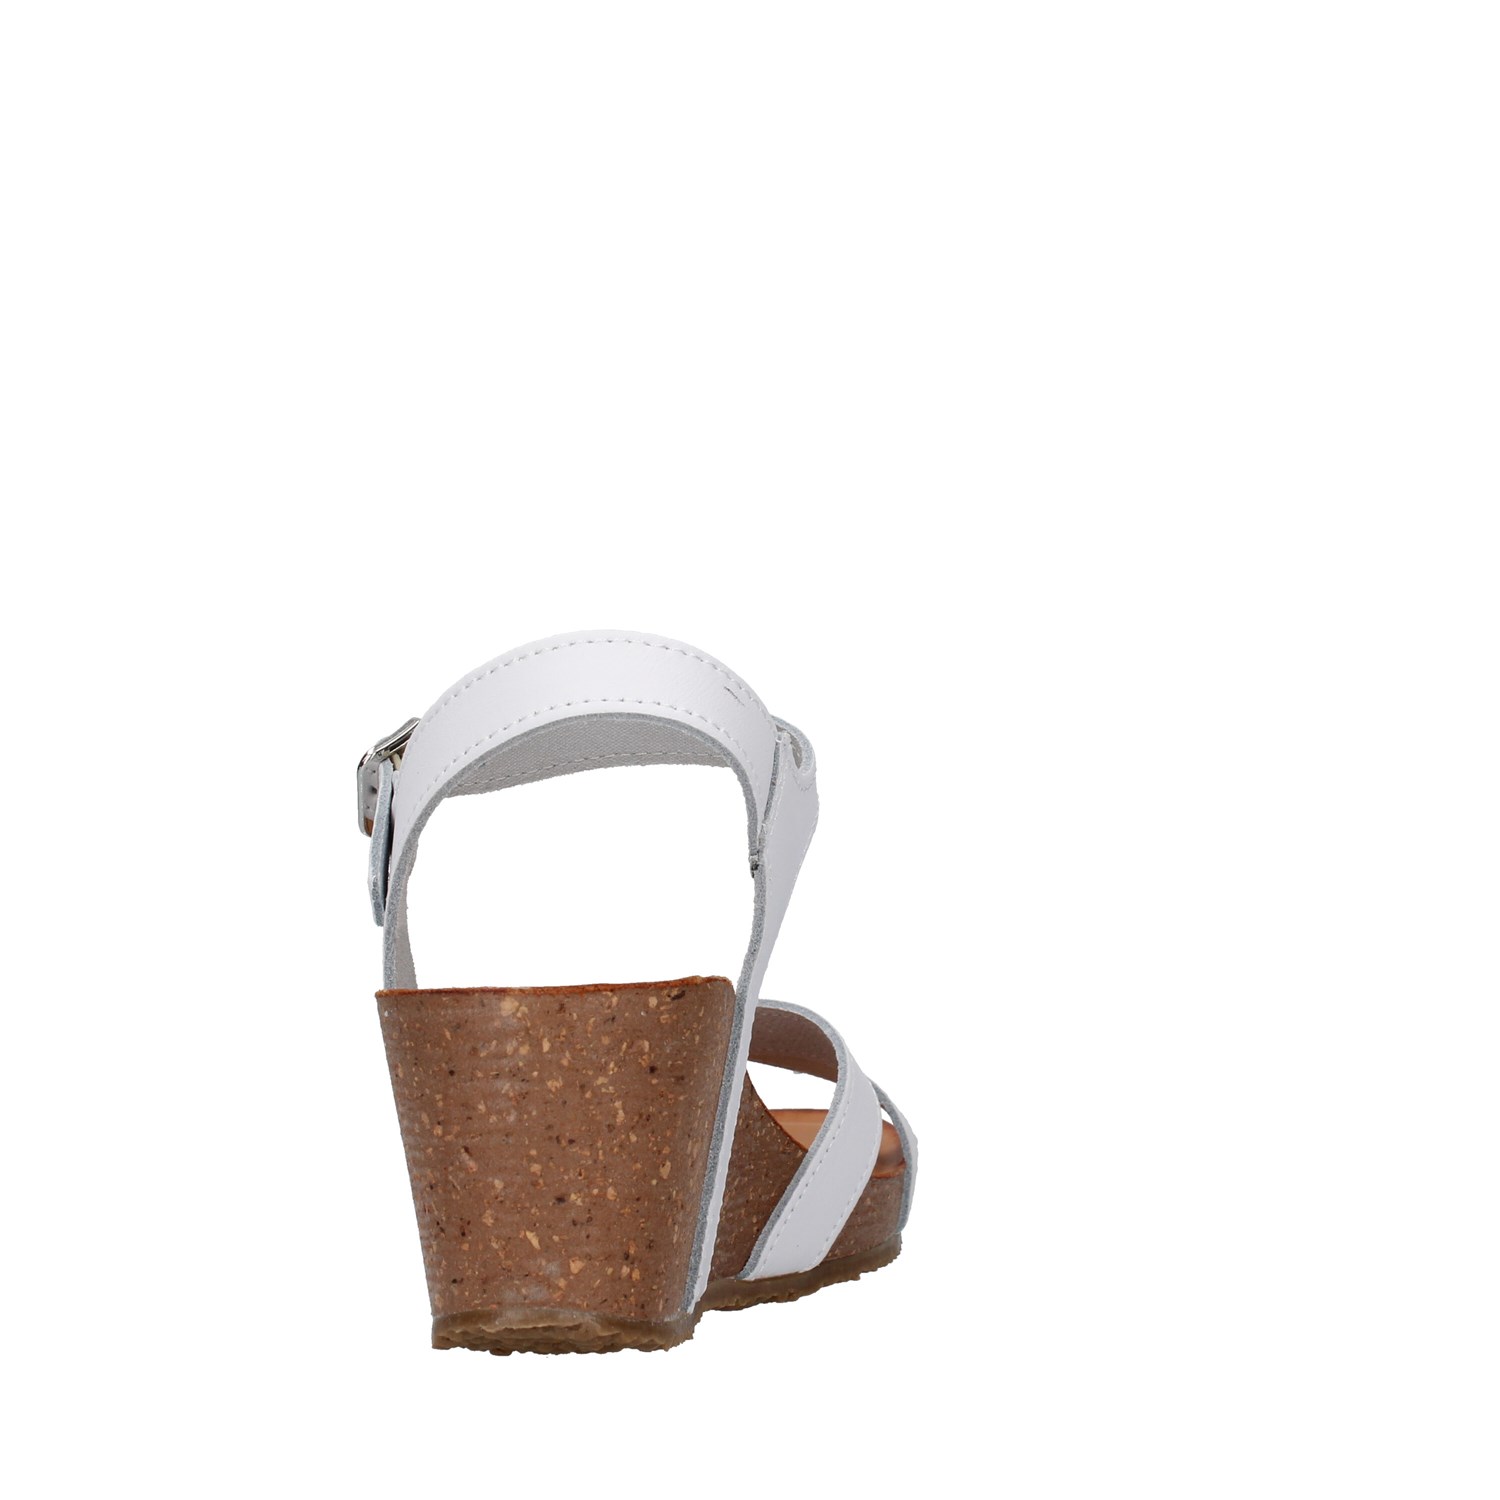 Bionatura Shoes Woman With wedge WHITE 37A870